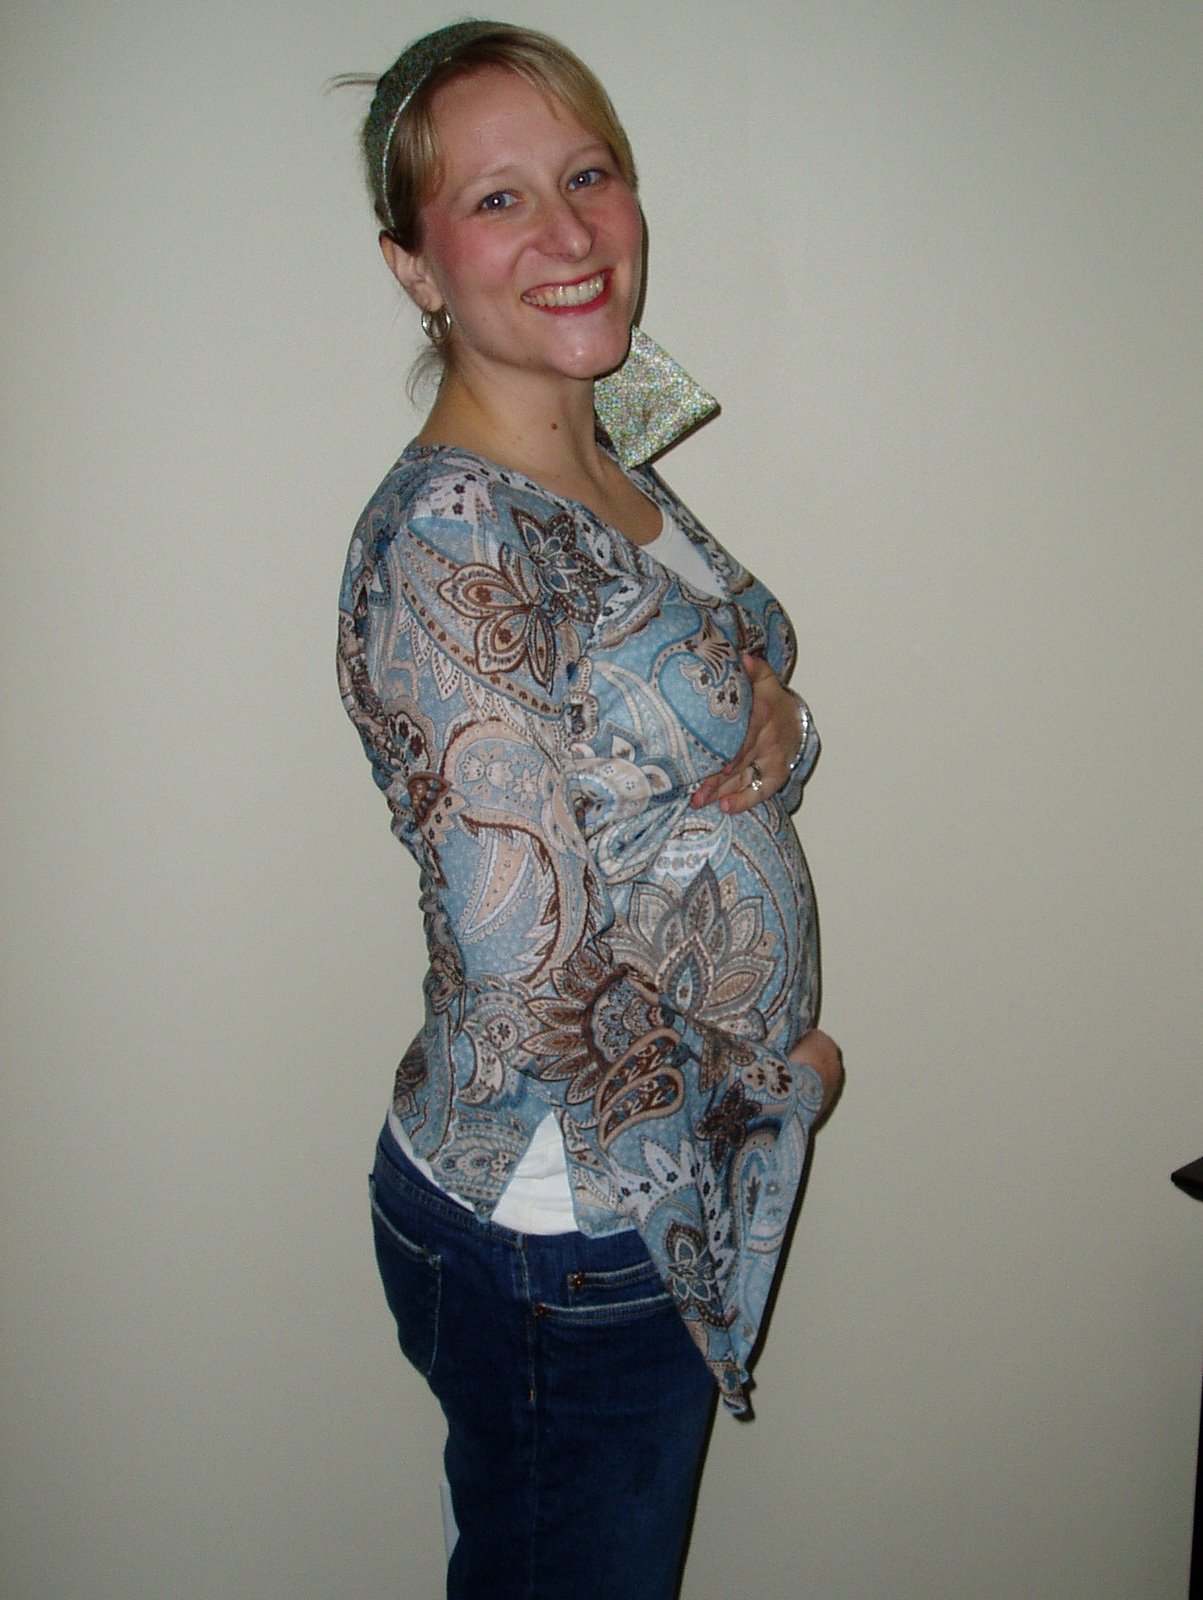 [2007+march+18+weeks+pregnant+cropped.jpg]